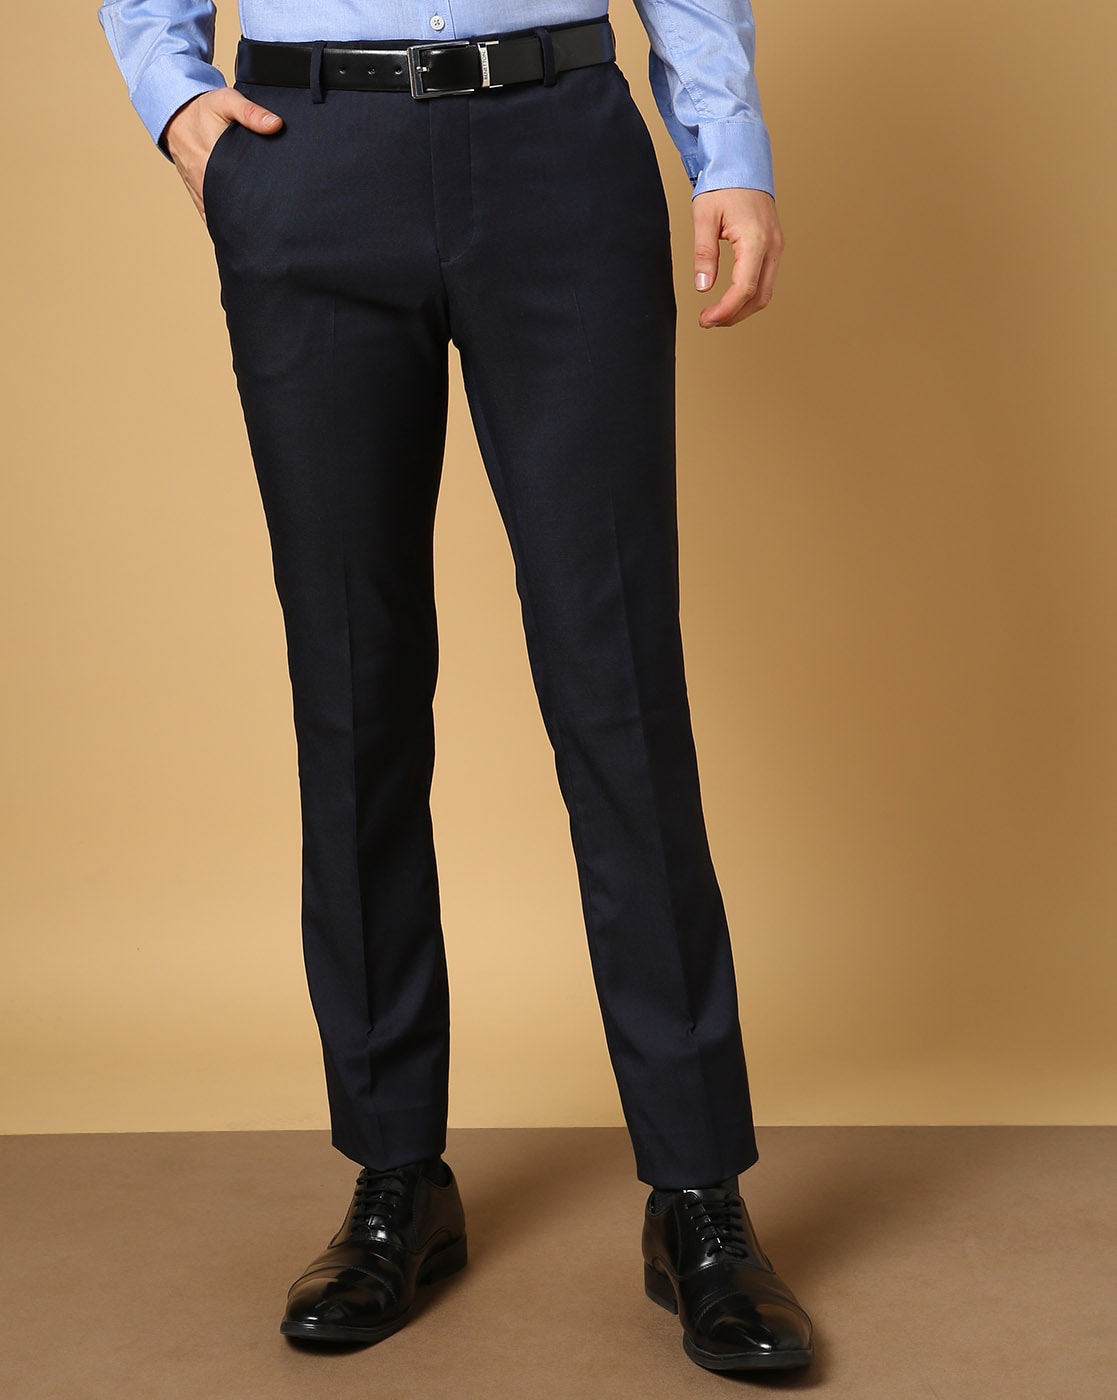 Buy Arrow Houndstooth Regular Fit Trousers - NNNOW.com